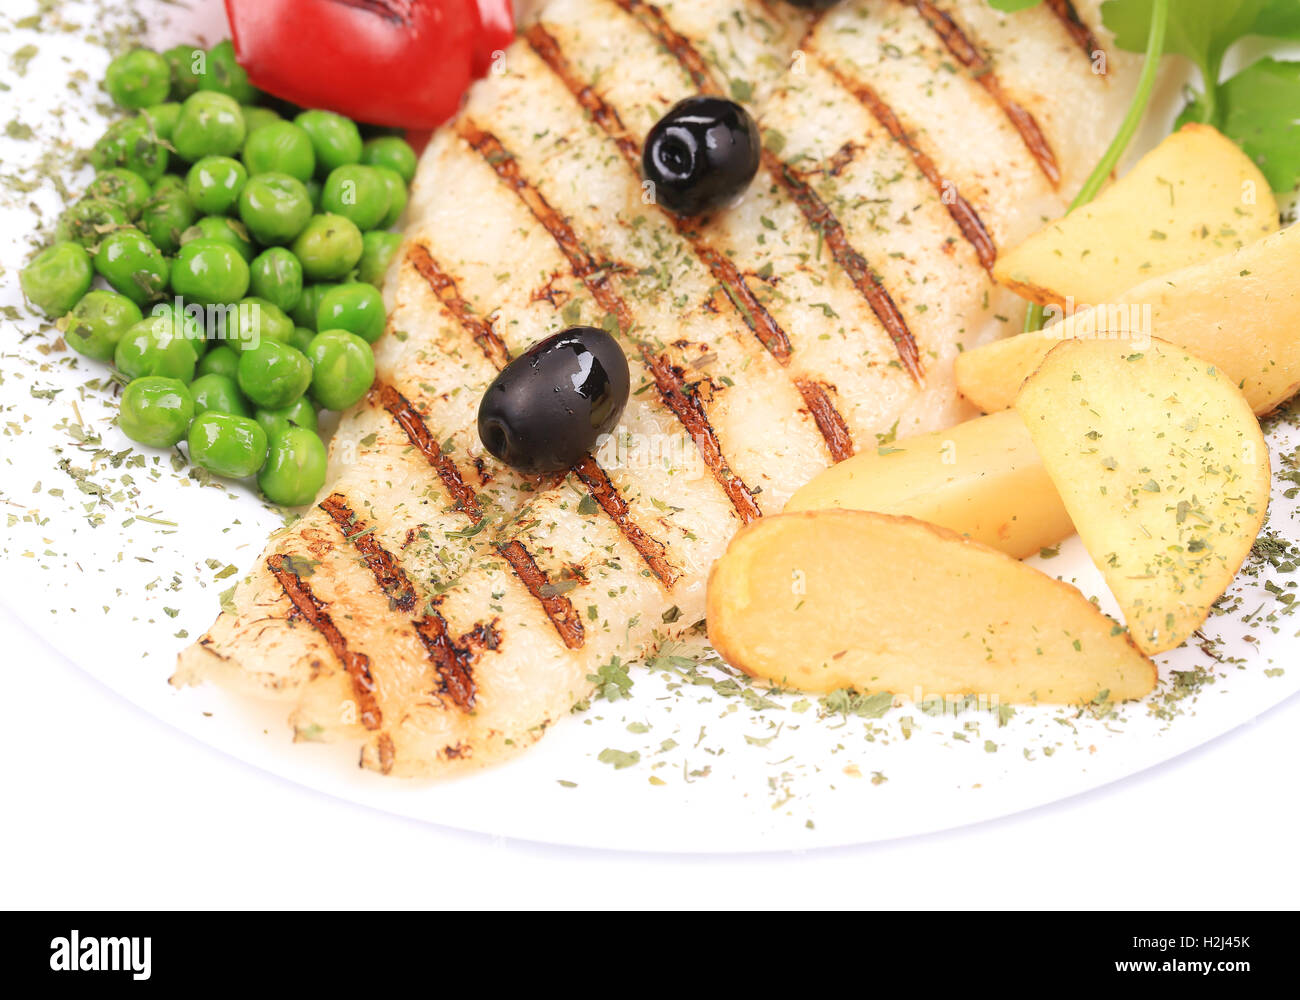 Grilled fish with popatoes. Stock Photo